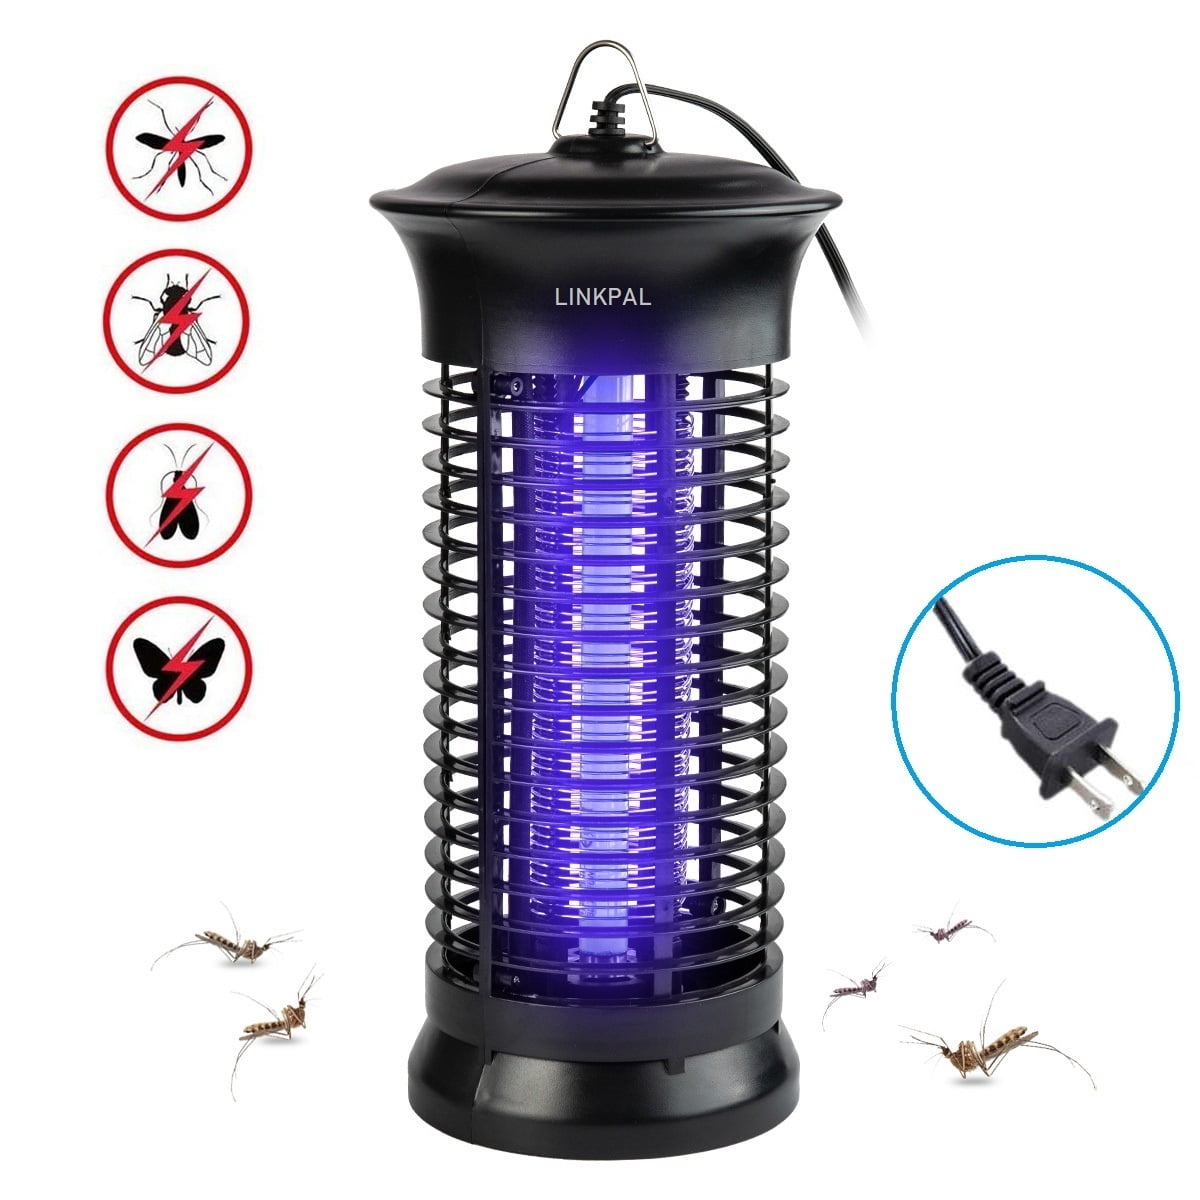 Details about   USB Led Mosquito Insect Killer Trap Lamp 5W 7W Pest Control Zapper lamp L2KO 